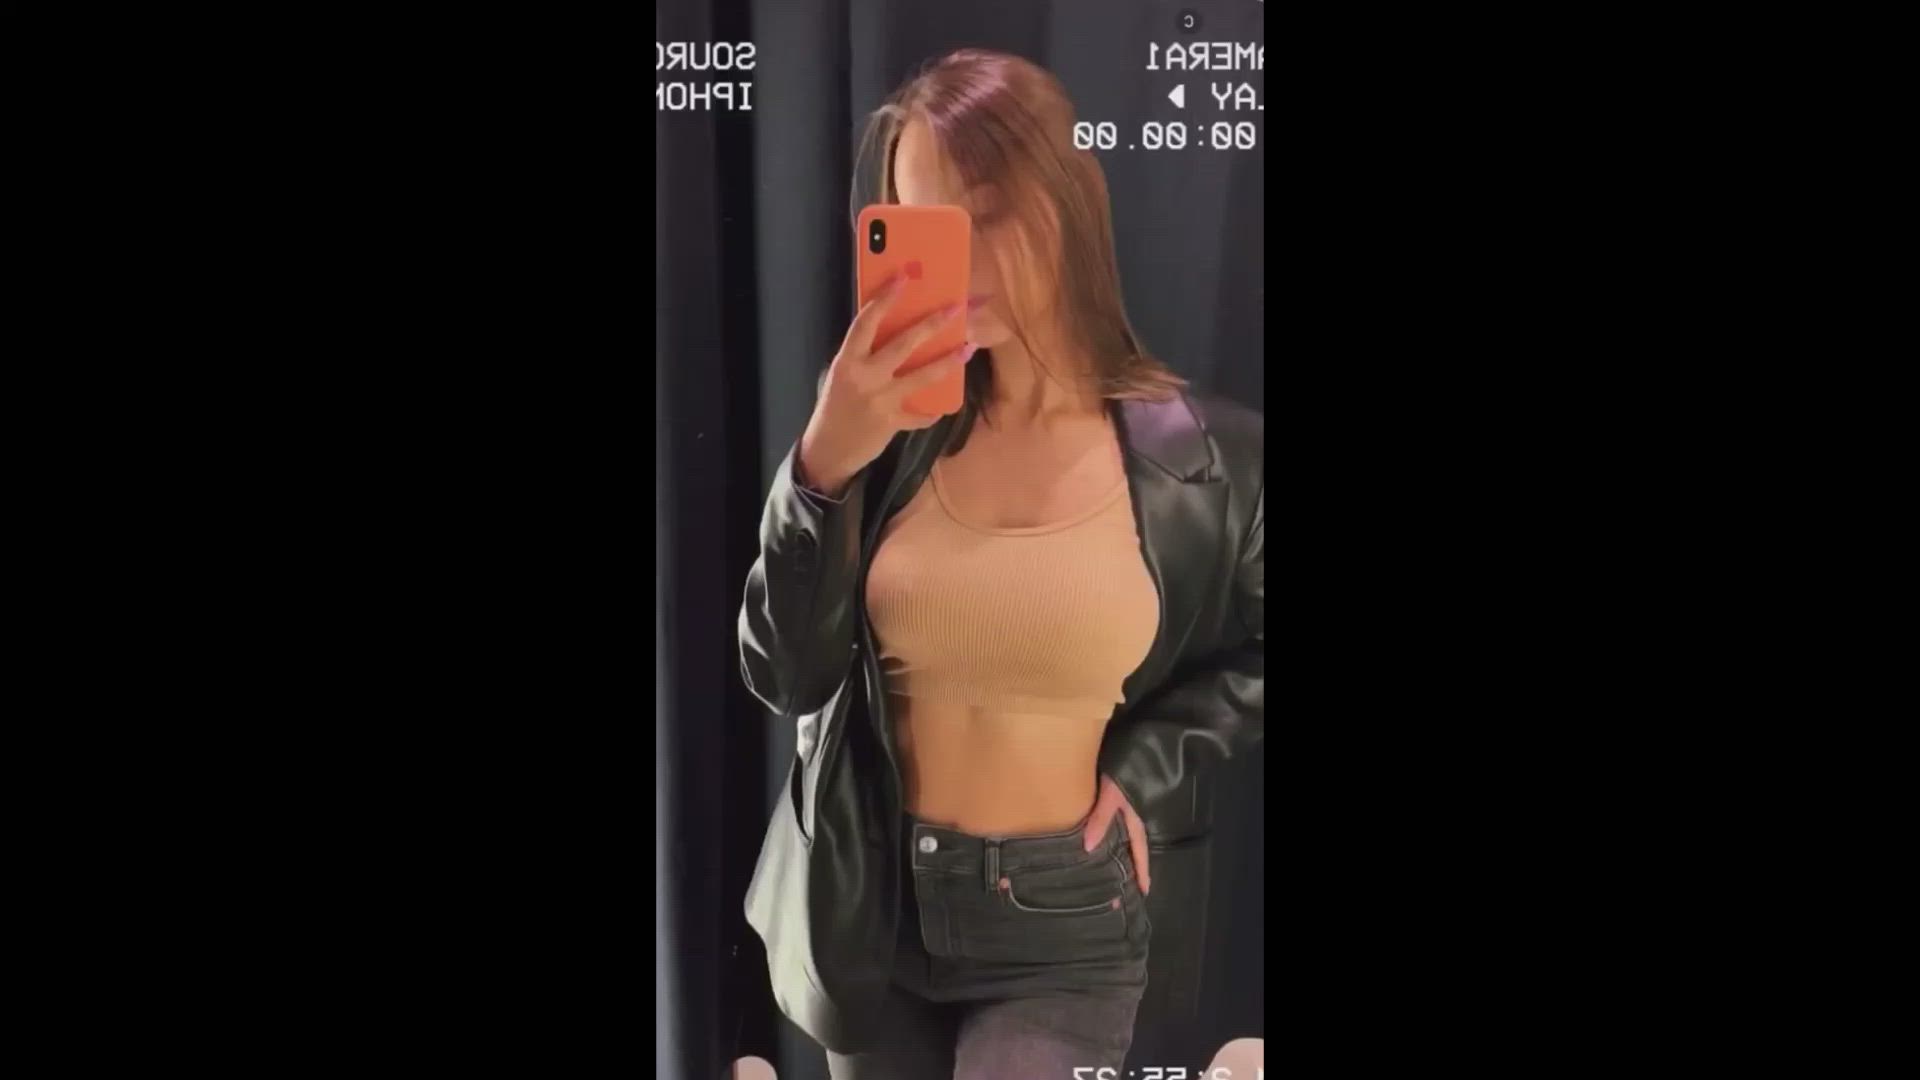 Big Tits porn video with onlyfans model bloodybodyy <strong>@ubloodybody</strong>